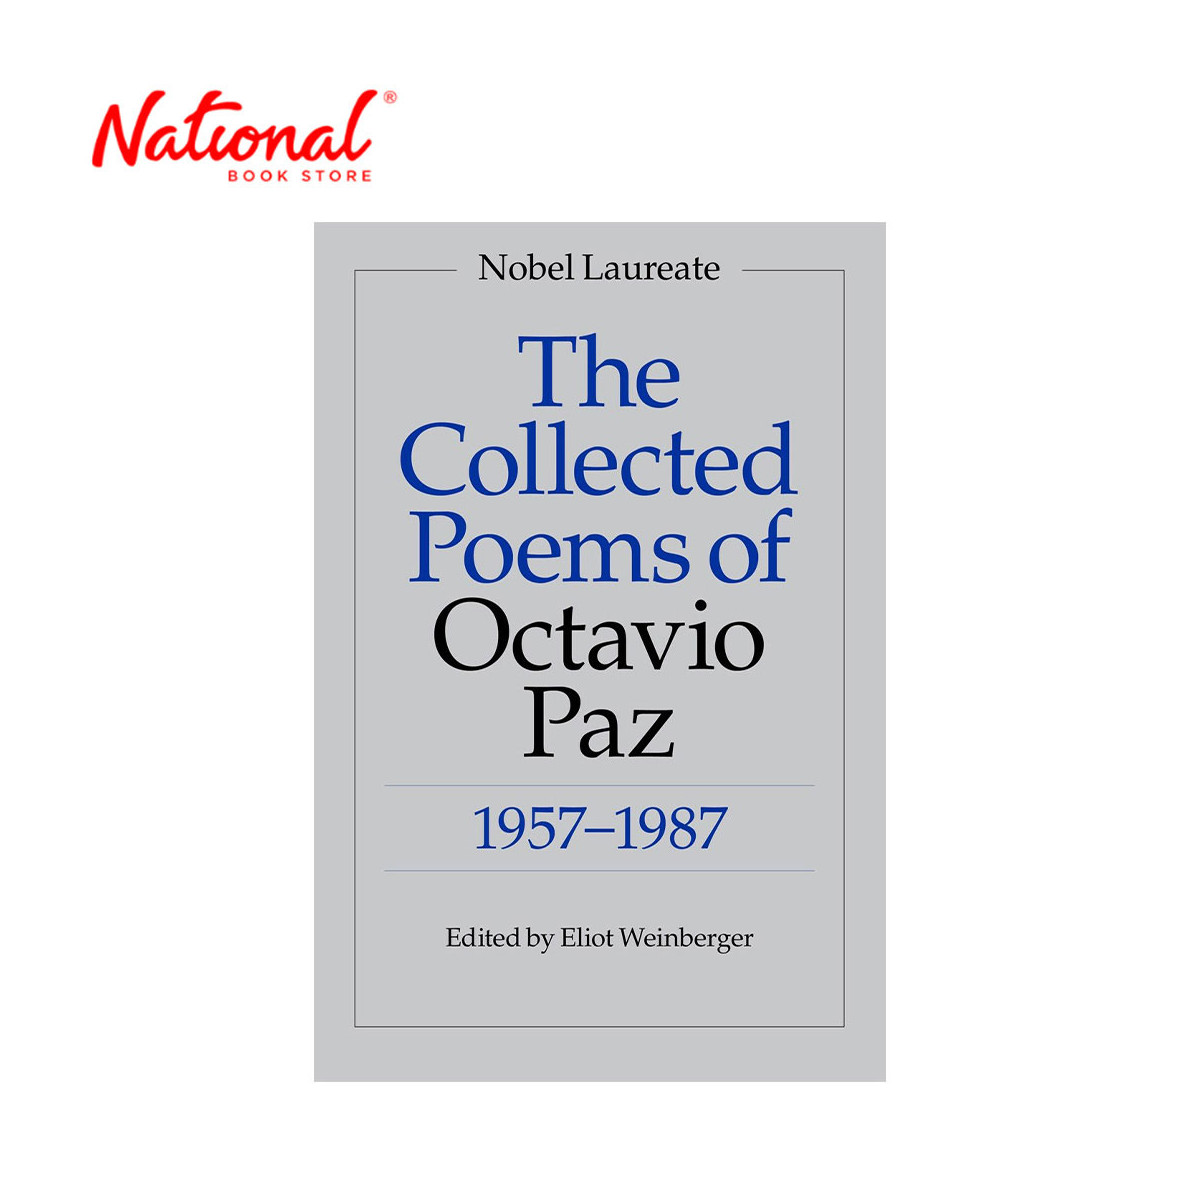 Collected Poems Of Octavio Paz by Octavio Paz - Trade Paperback - Poetry - Poems